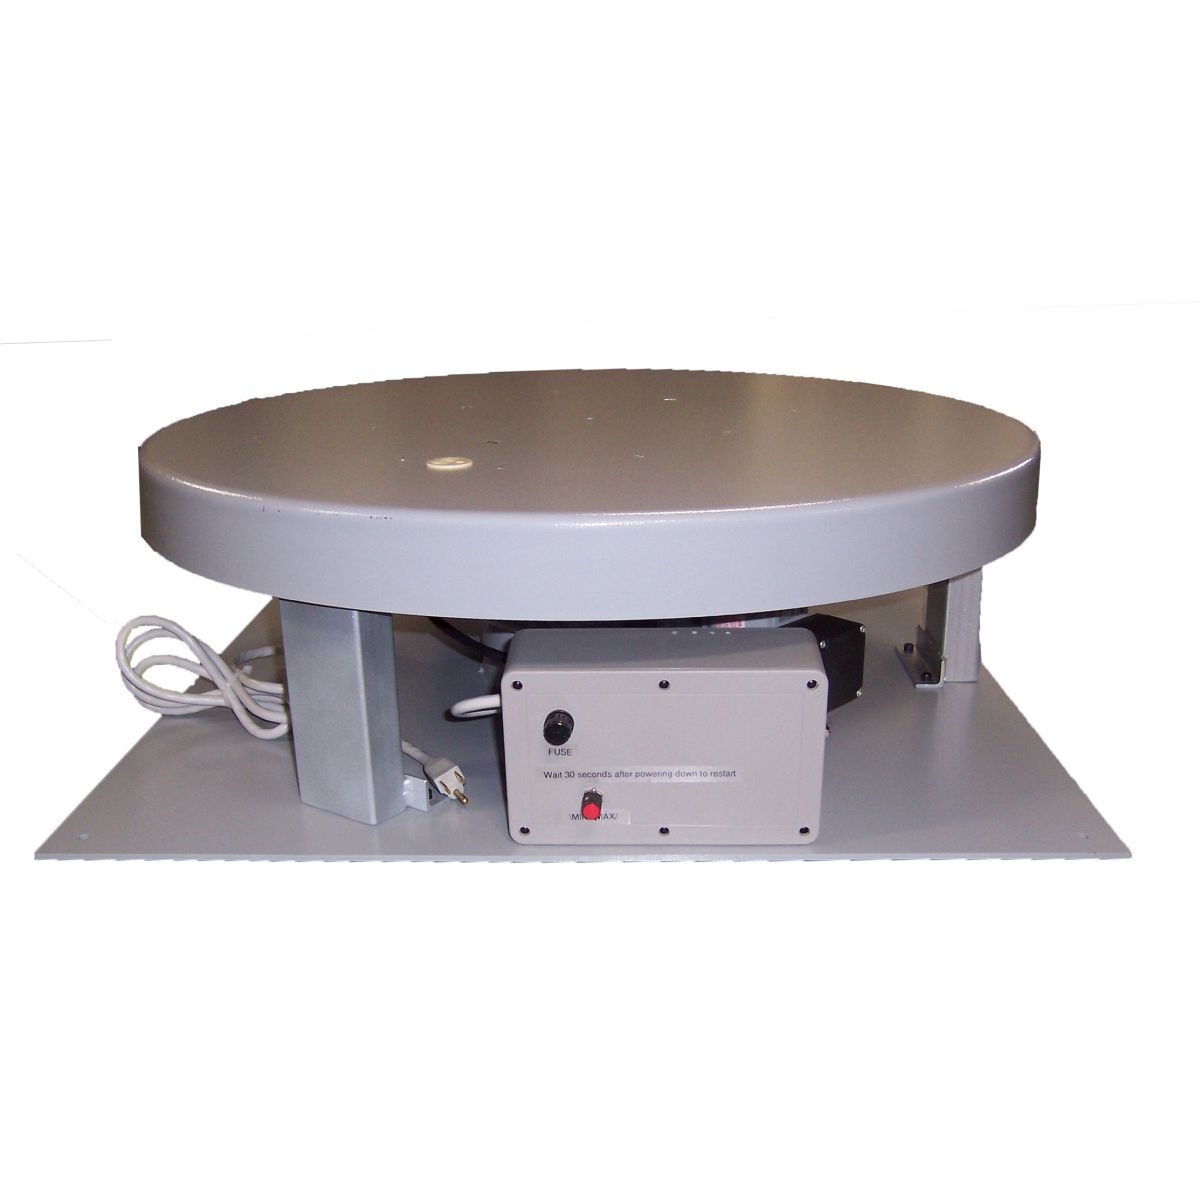 Motorized Display Turntable w/ 8 amp Outlet - 1,000 lb Cap (HD201)